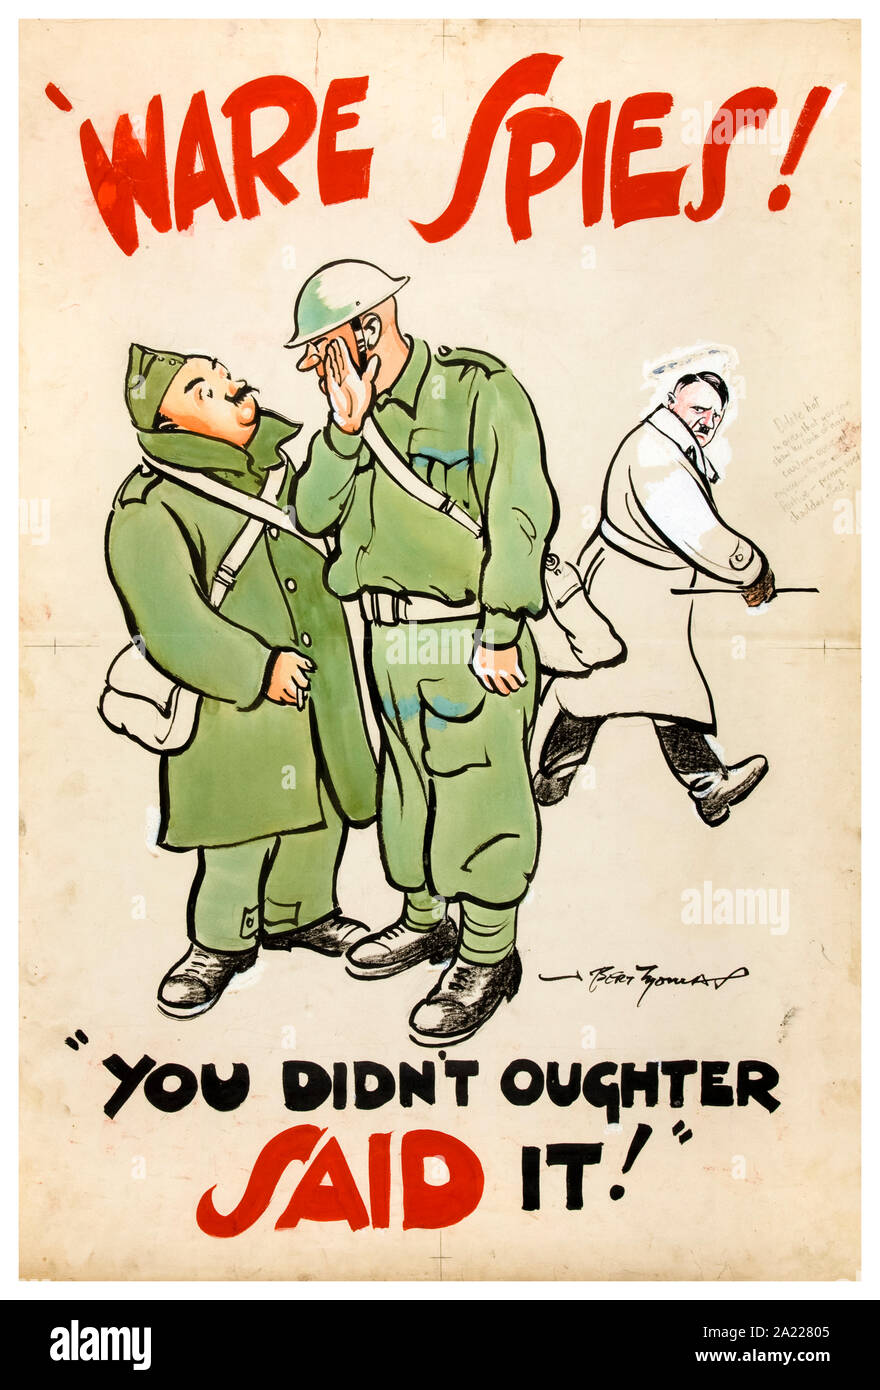 British, WW2 Careless talk poster, (Beware) `Ware spies!, You didn't oughter said it (soldiers talking with Hitler figure nearby), poster, 1939-1946 Stock Photo